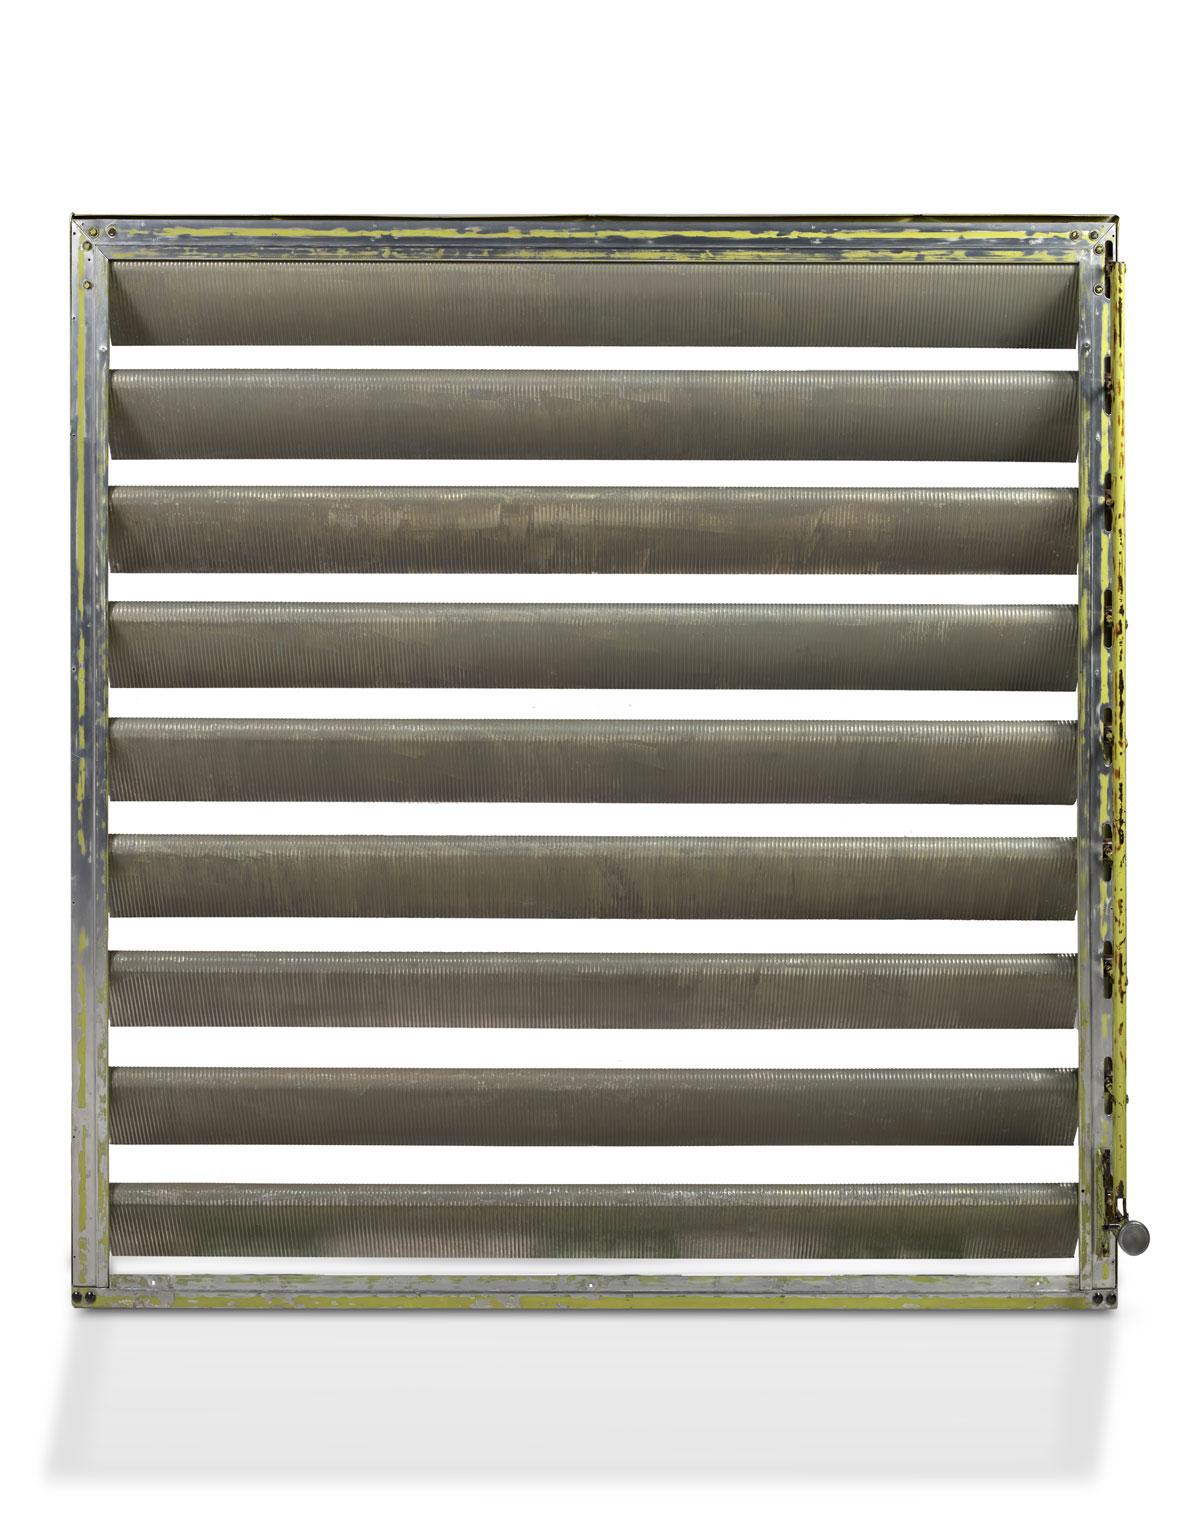 Jean Prouvé

Louvers, 1952.

Provenance
- One of 19 ground level studios from The Unité d’habitation Air France, Brazzaville –Congo.

Nine adjustable louvers, gray lacquered, in folded grooved aluminum sheet, connected by a rail system